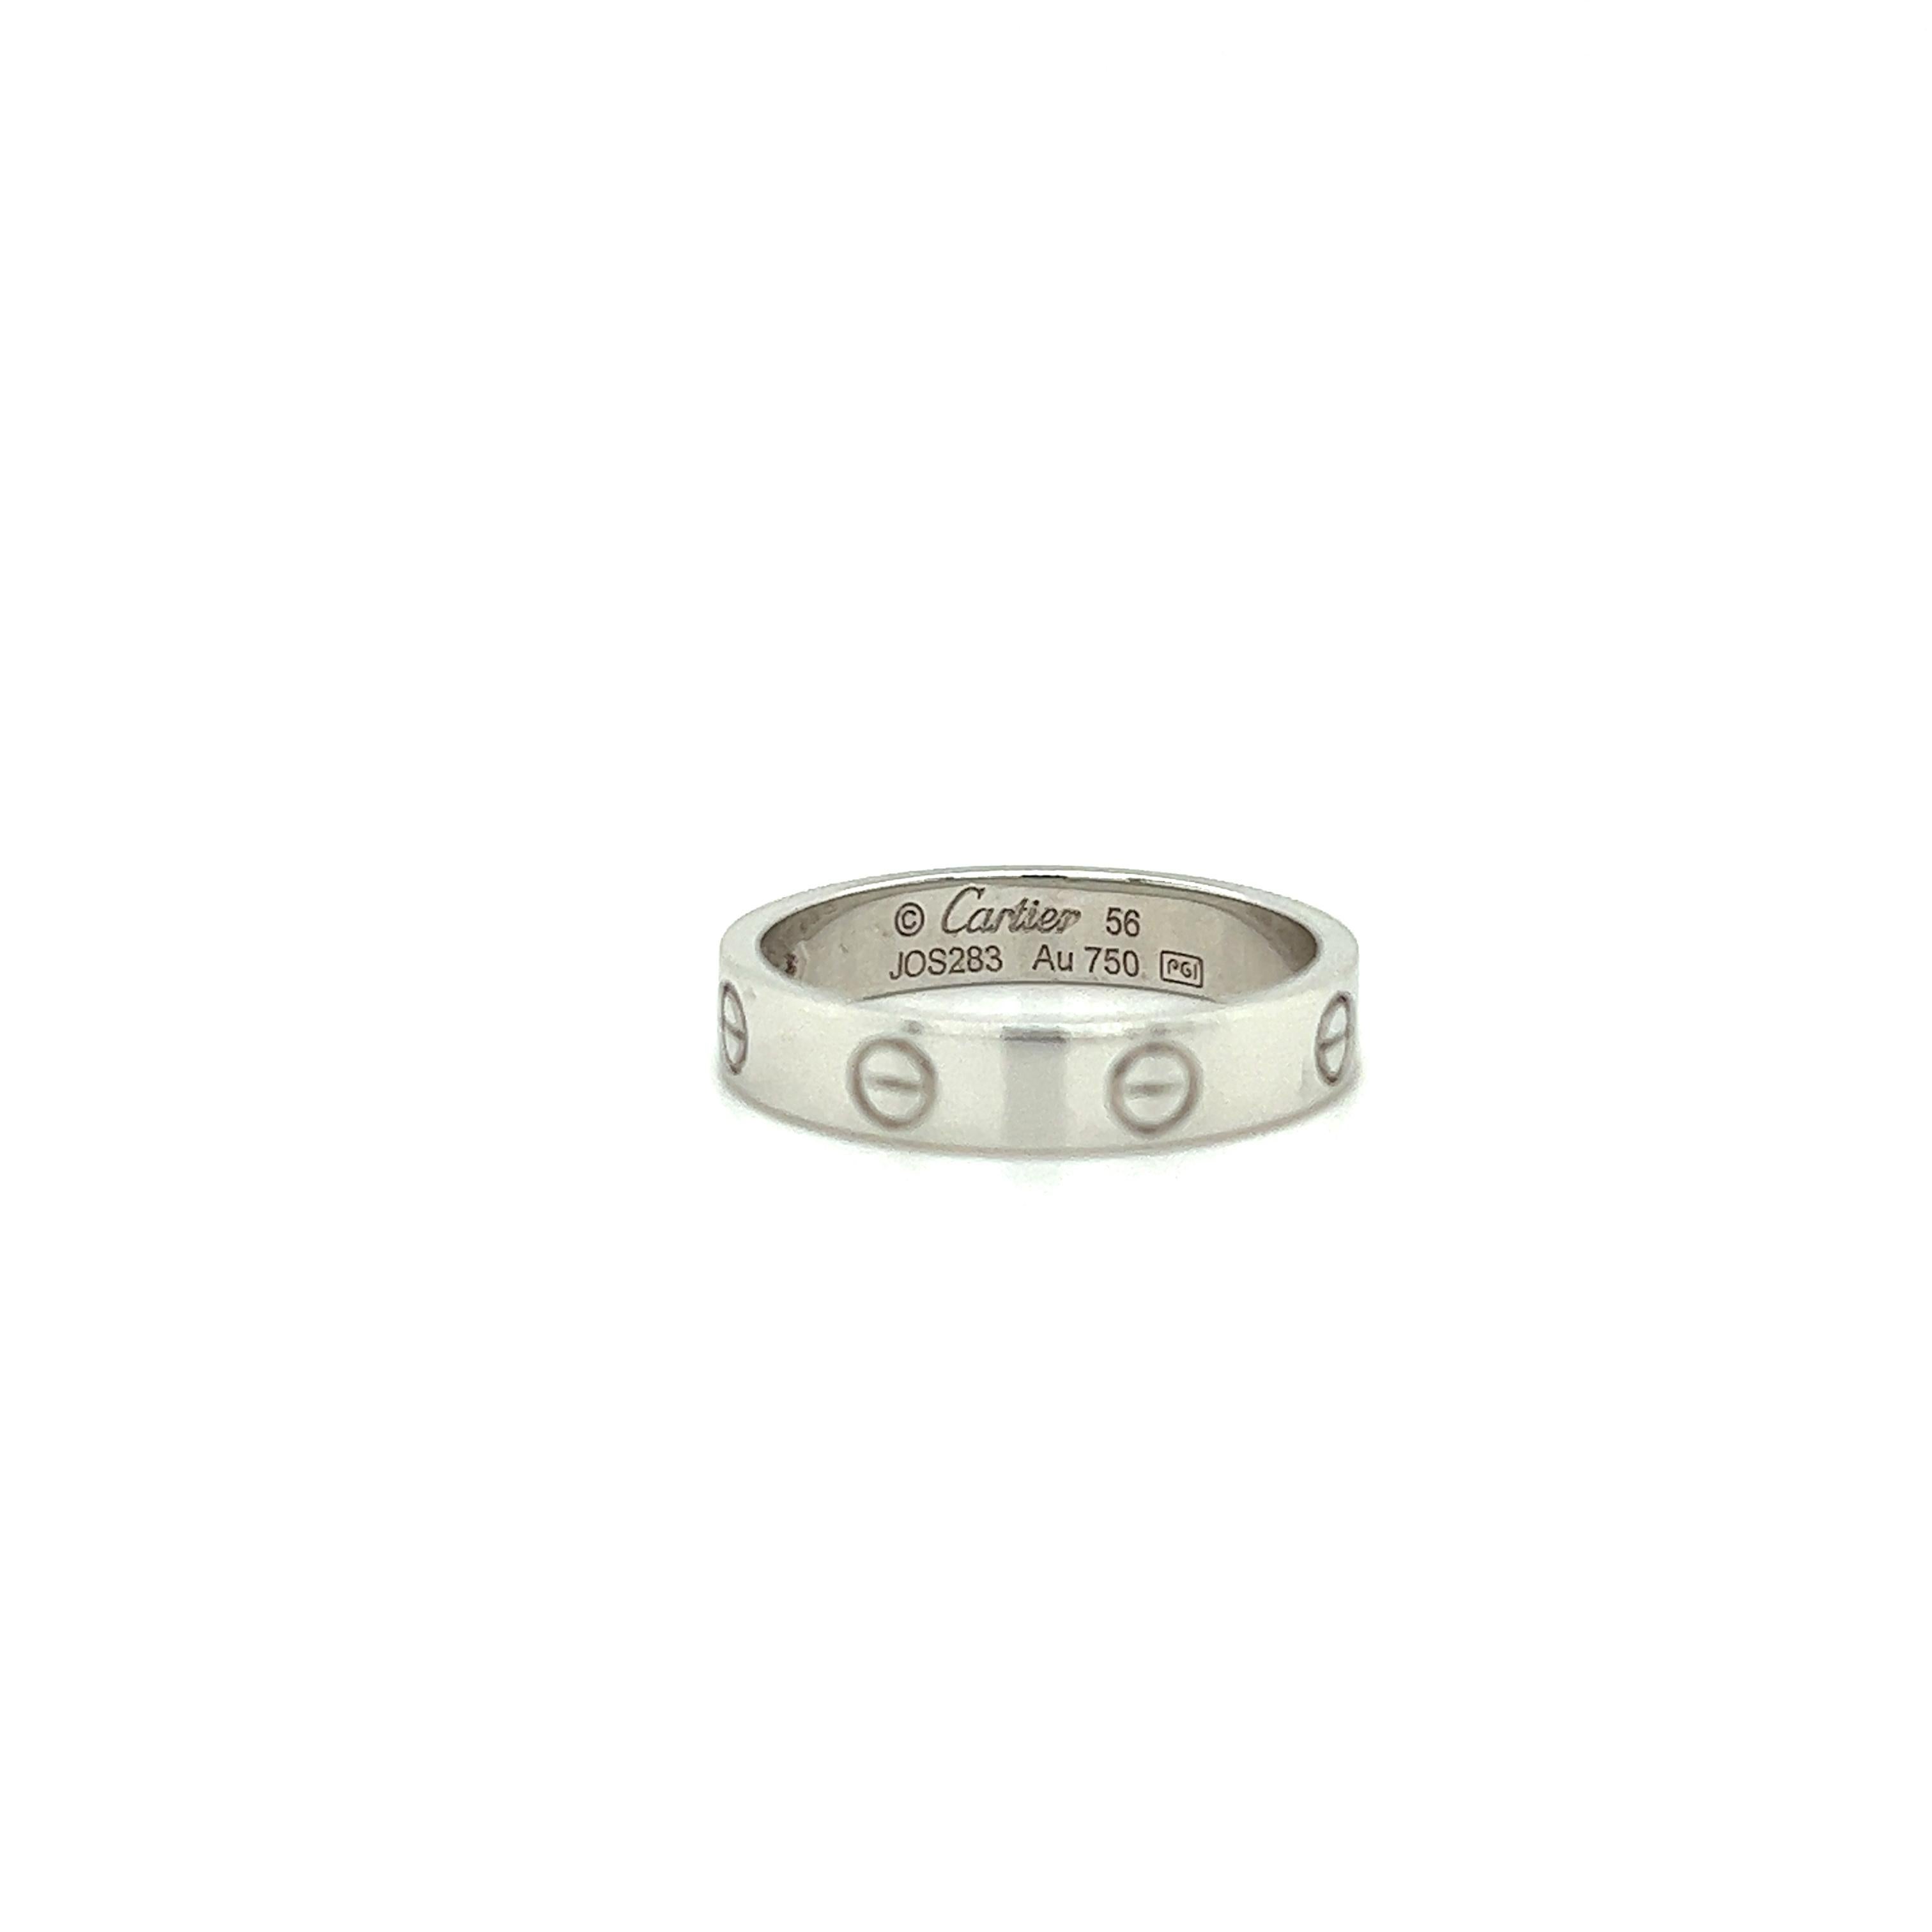 Beautiful timeless creation from Cartier.
This elegant wedding band is crafted in 18k white gold. The ring is set with one earth mined natural round brilliant cut diamond weighing 0.02 carat. 
The ring is a size 56 or 7.5 and fully hallmarked by